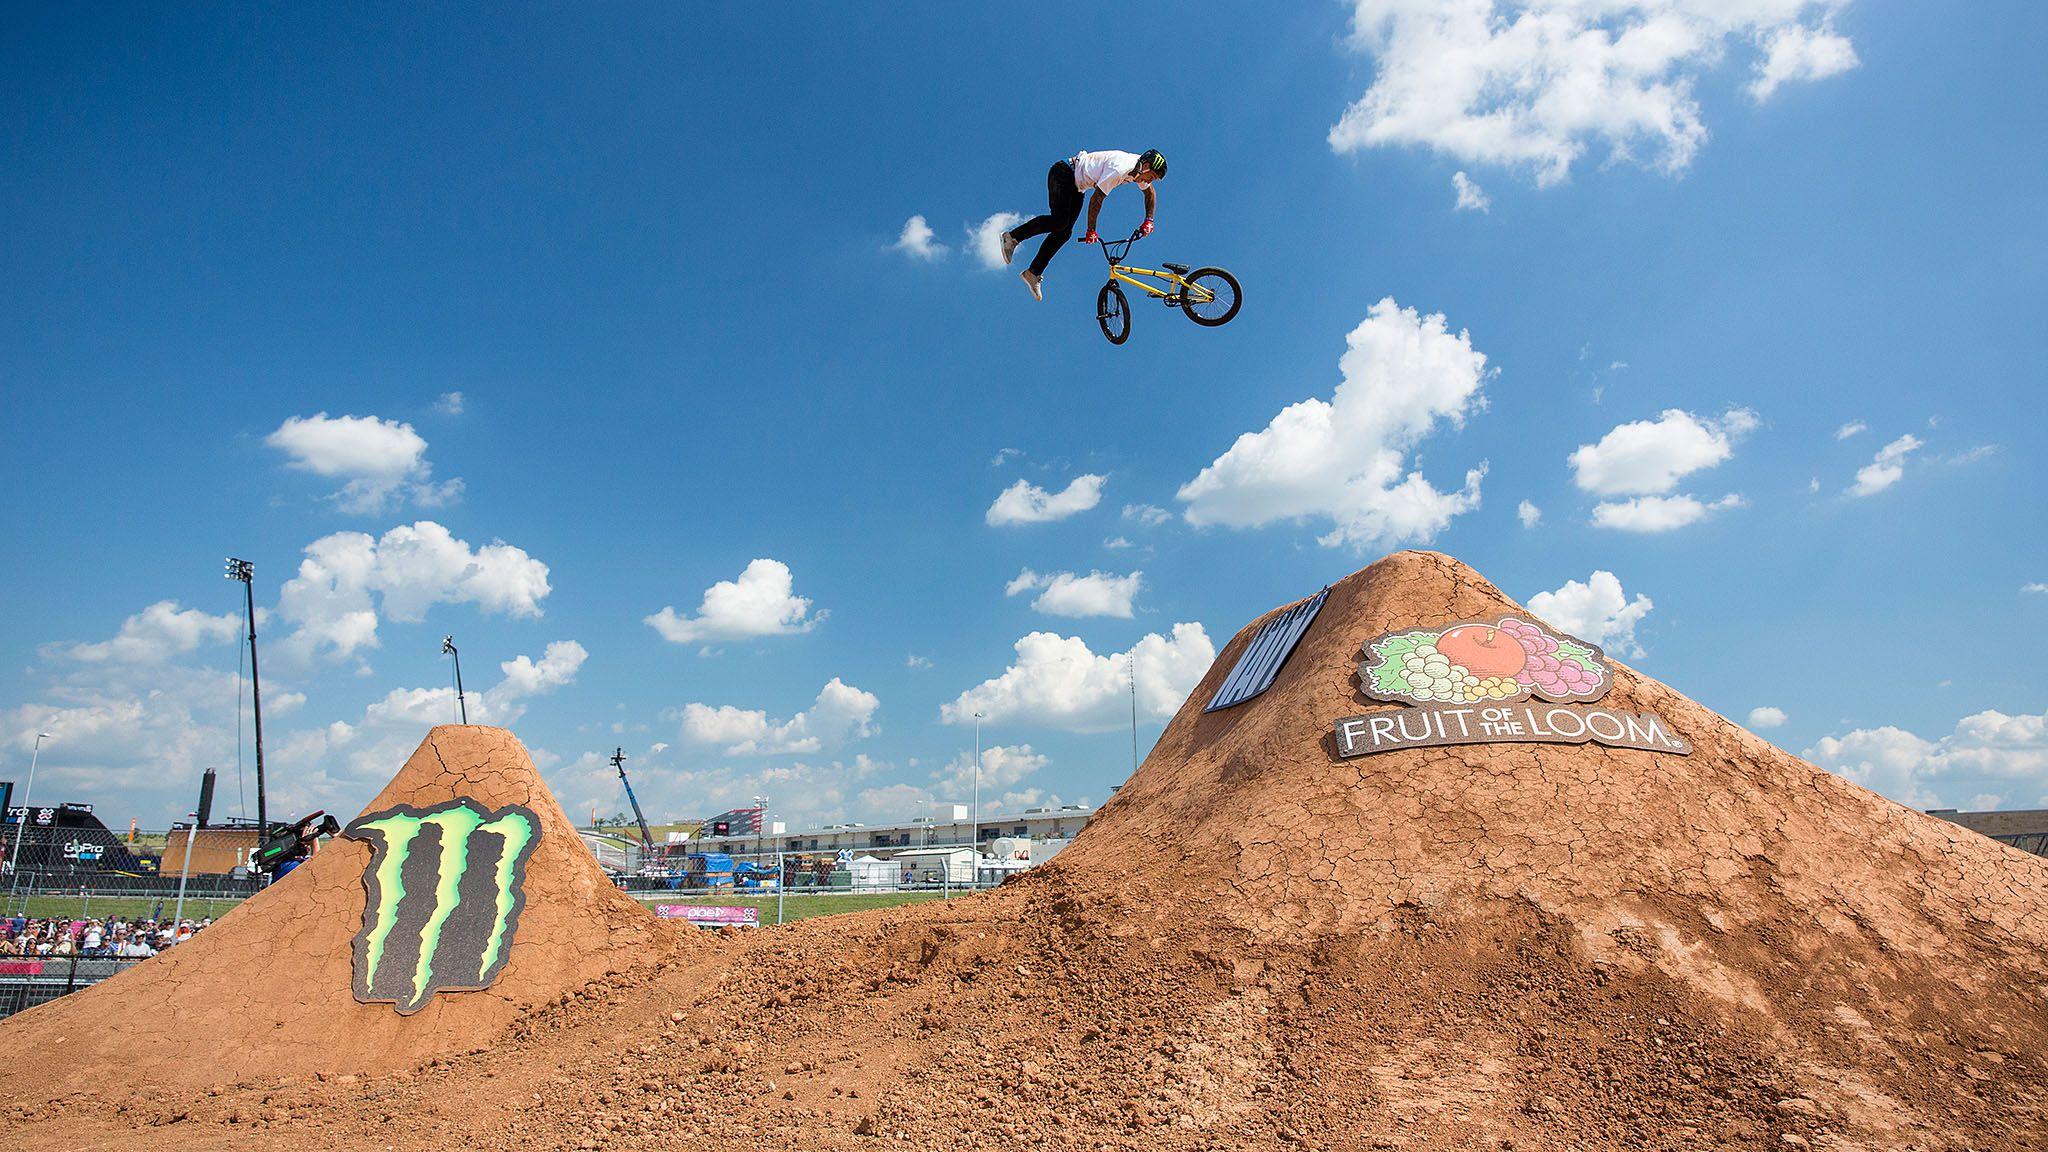 The 14 riders who competed Saturday in BMX Dirt were an experienced